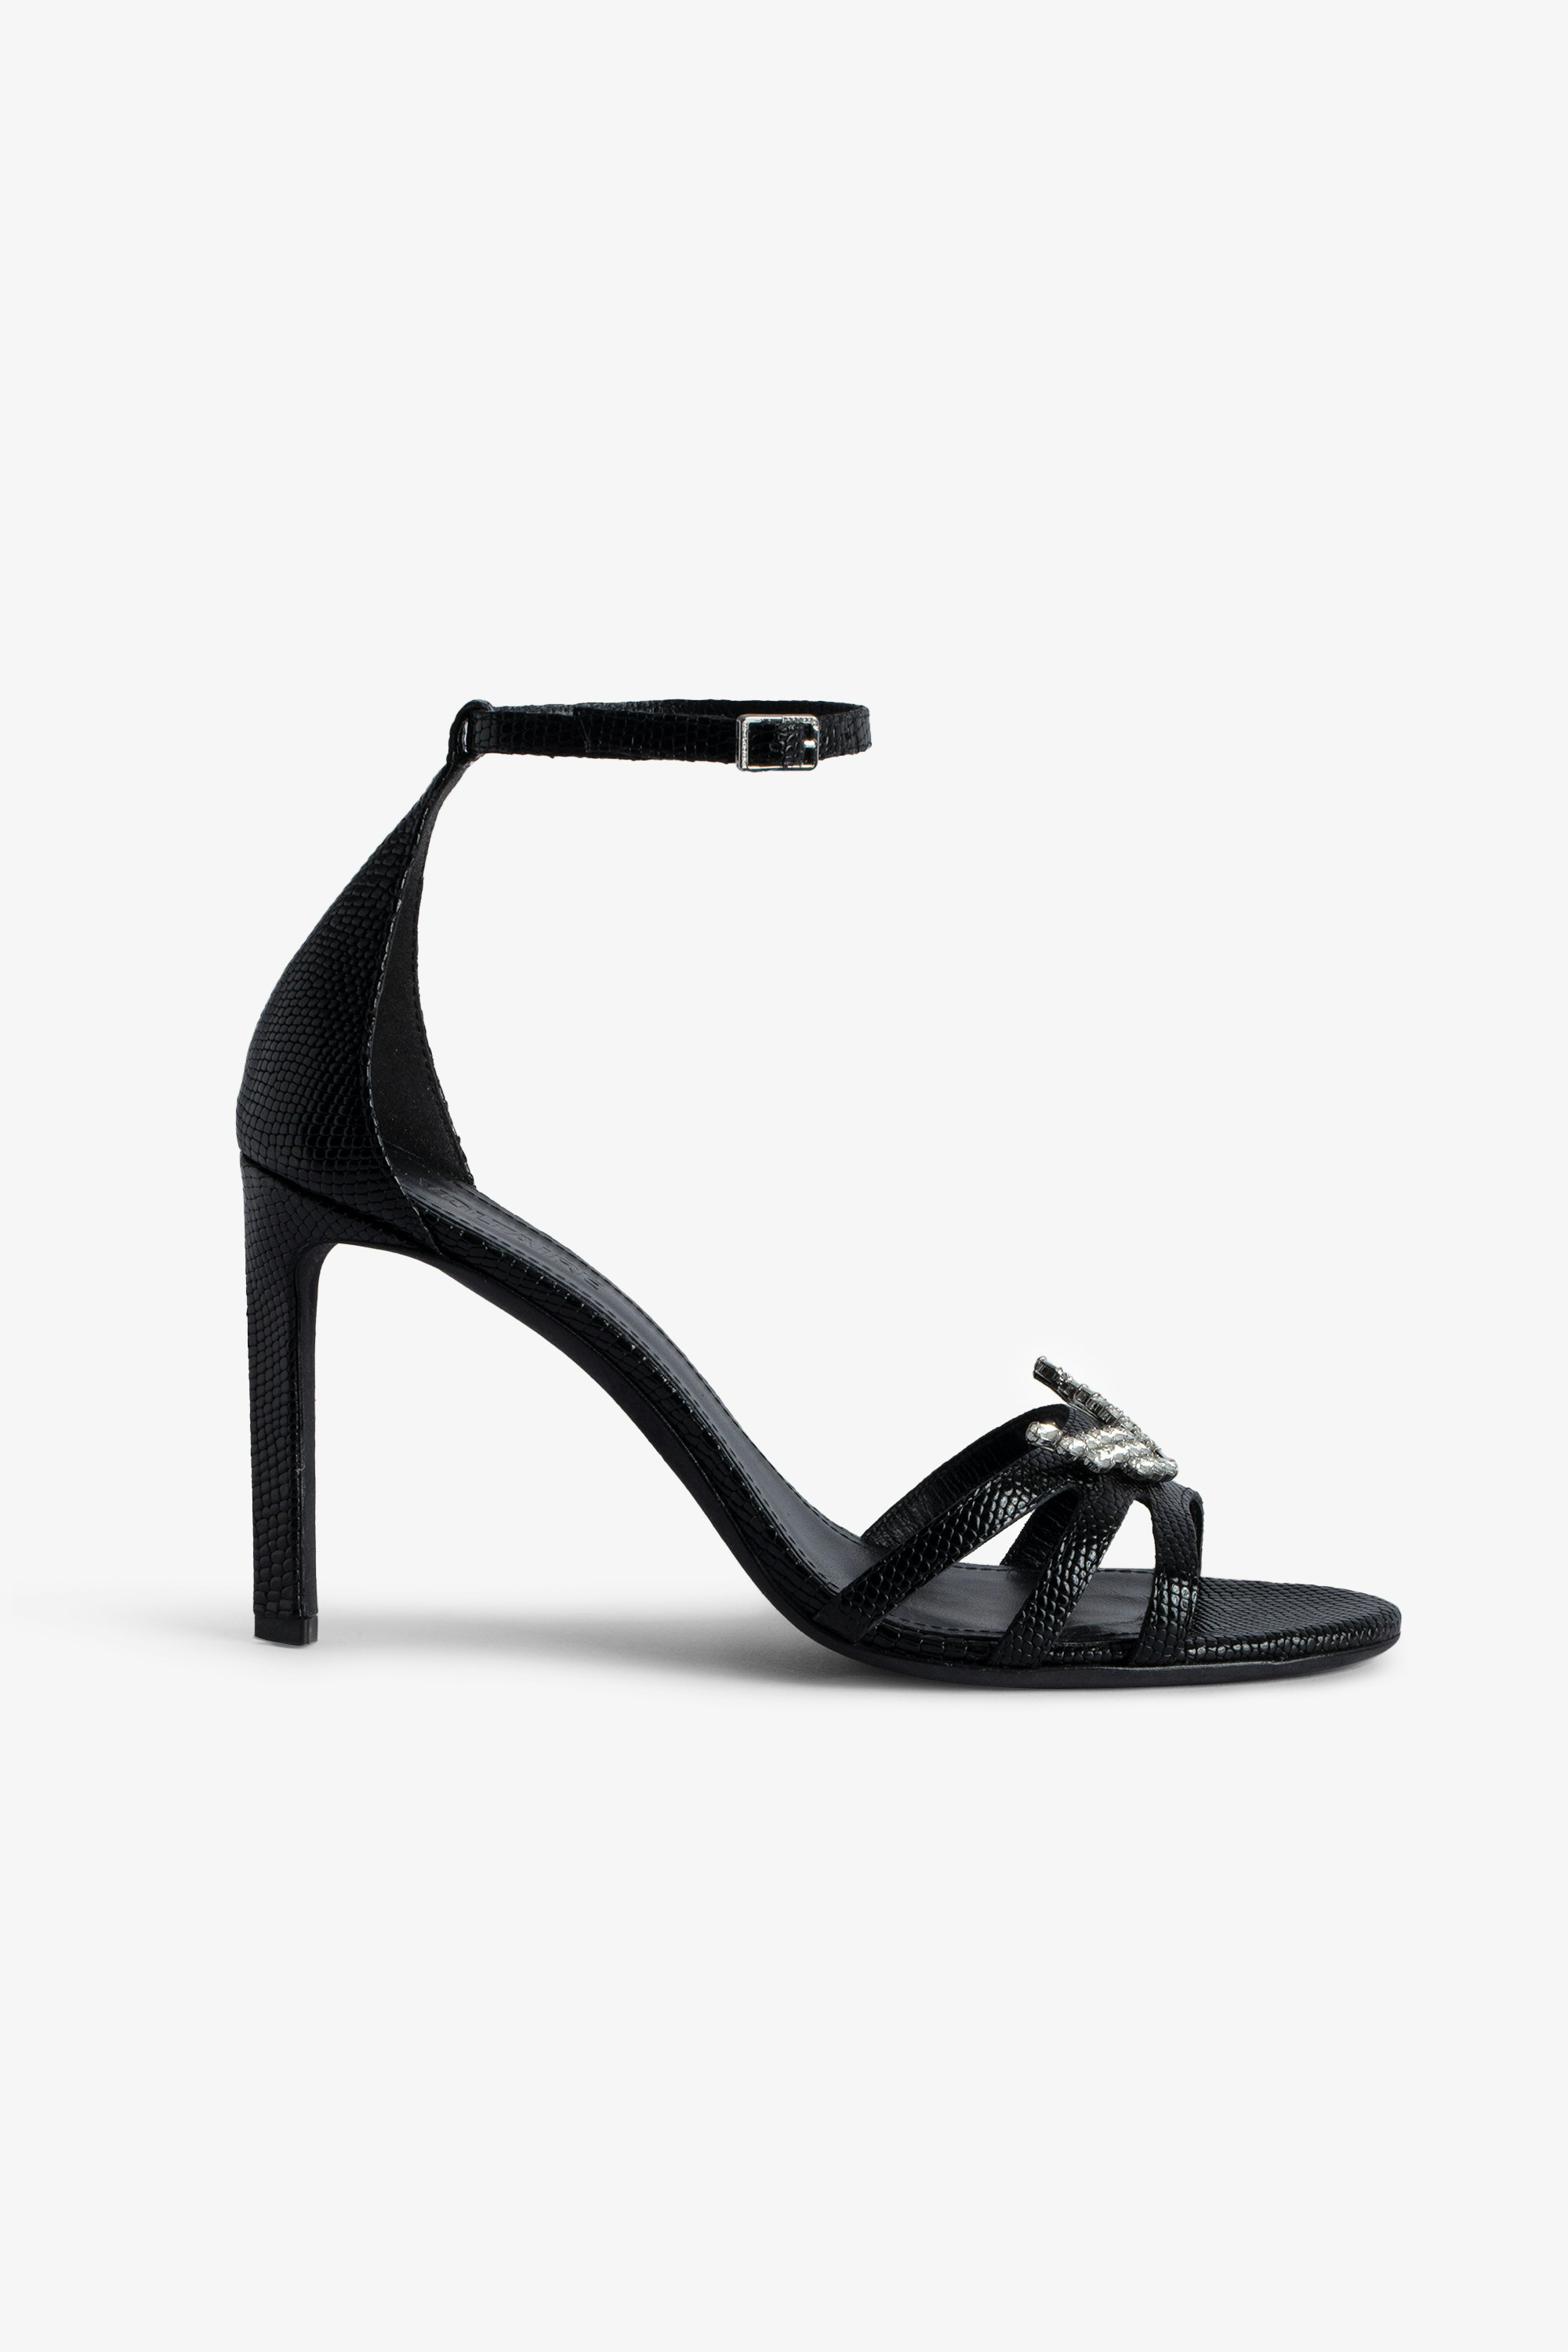 Amee Wing Court Shoes Women’s black iguana-embossed leather court shoes with straps and diamanté wings charm.